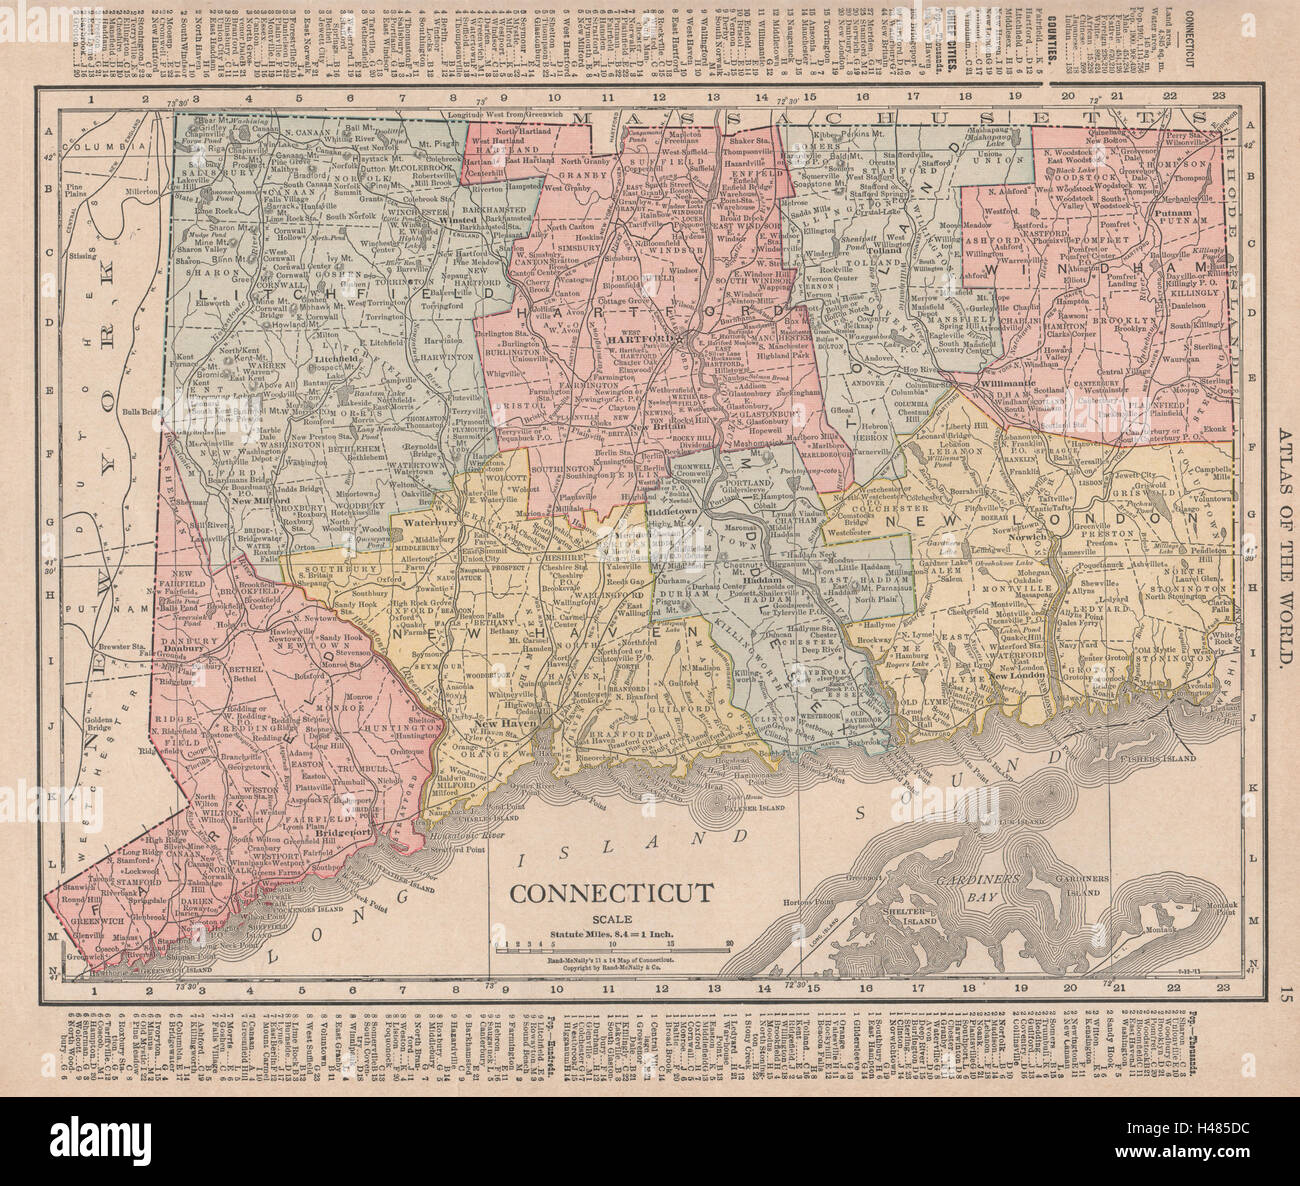 Connecticut state map showing counties. RAND MCNALLY 1912 old antique Stock Photo